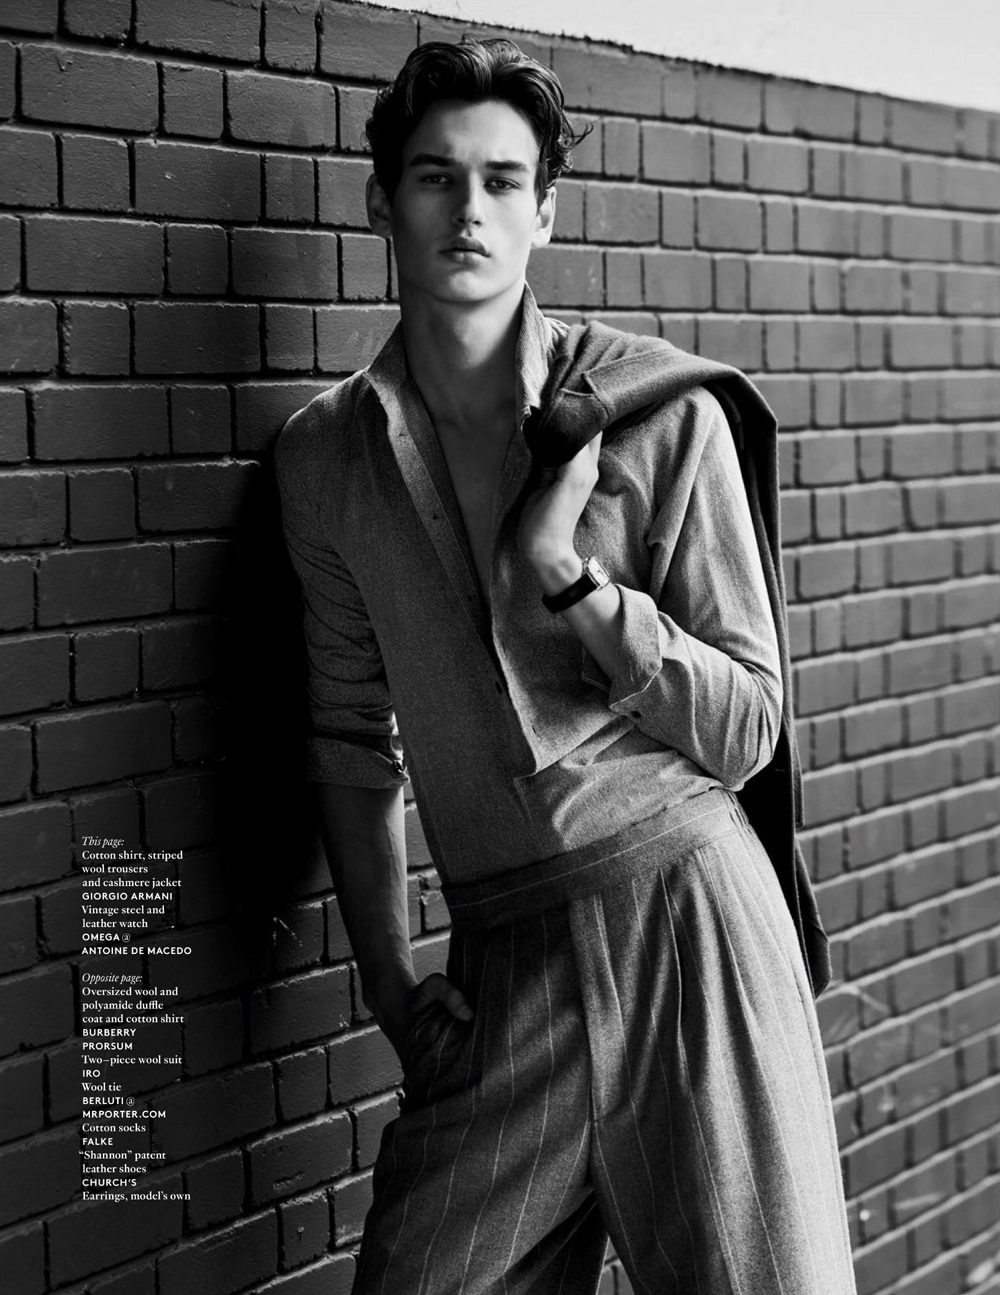 VOGUE HOMMES: Faces by Solve Sundsbo - Image Amplified